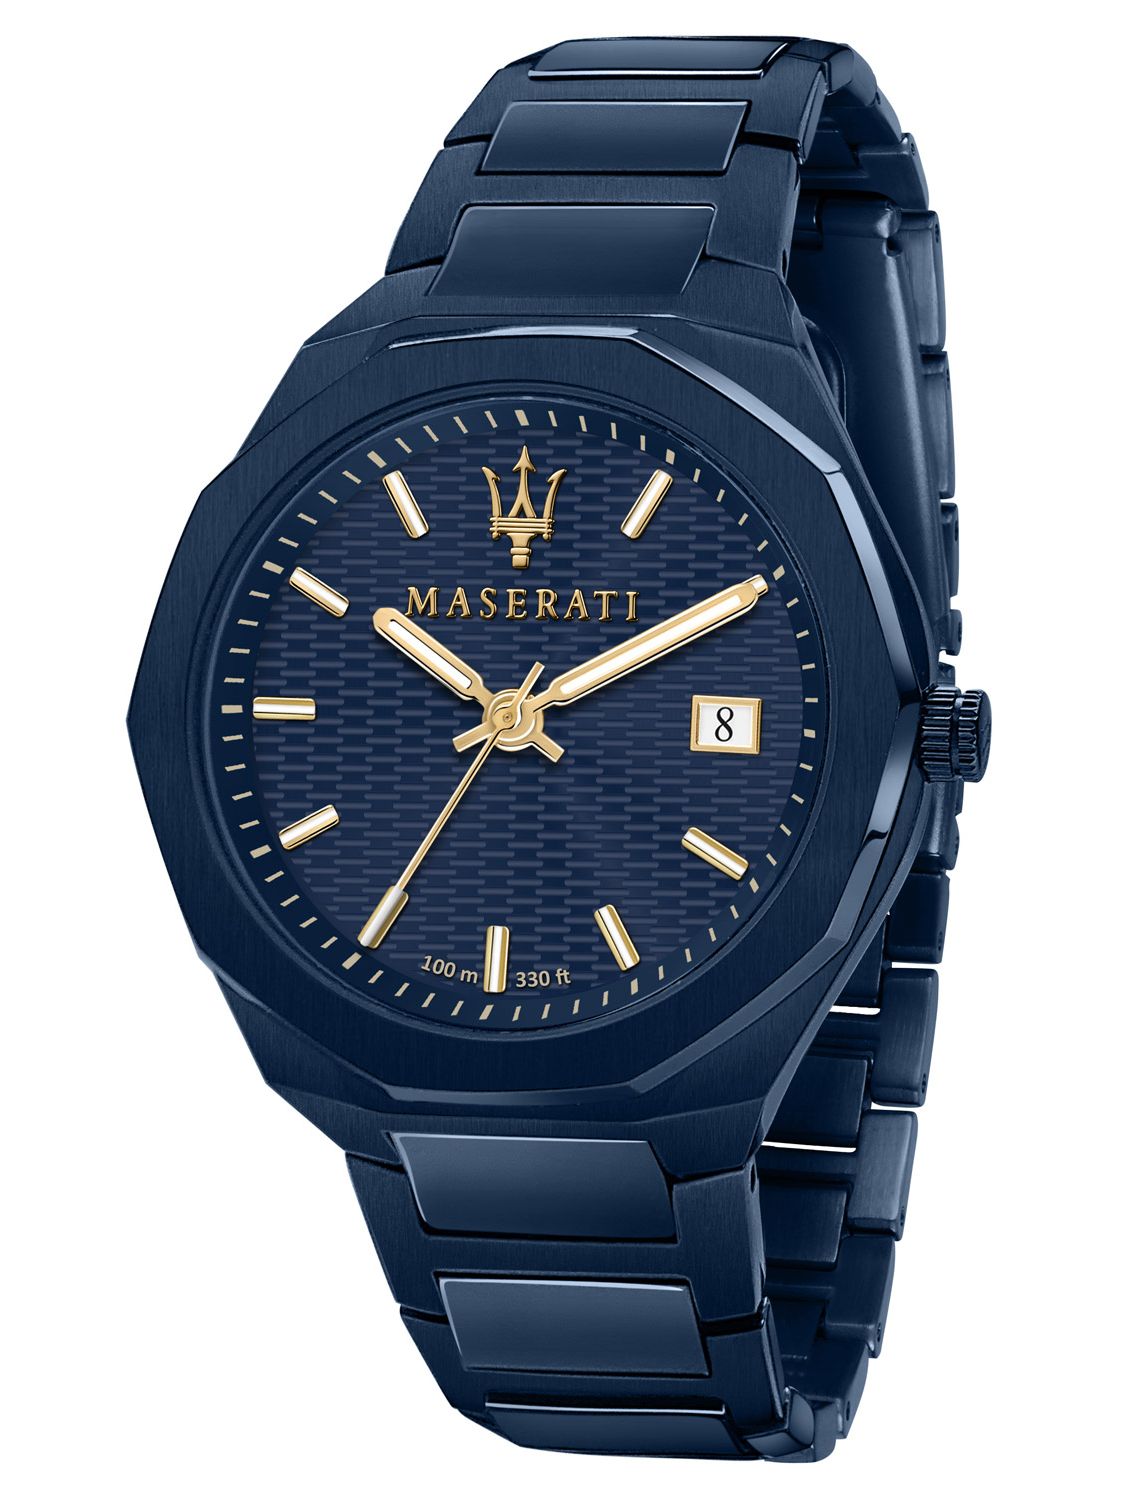 Maserati Guilloche Blue Edition 42mm Stainless Steel Watch For Men - R8853141001